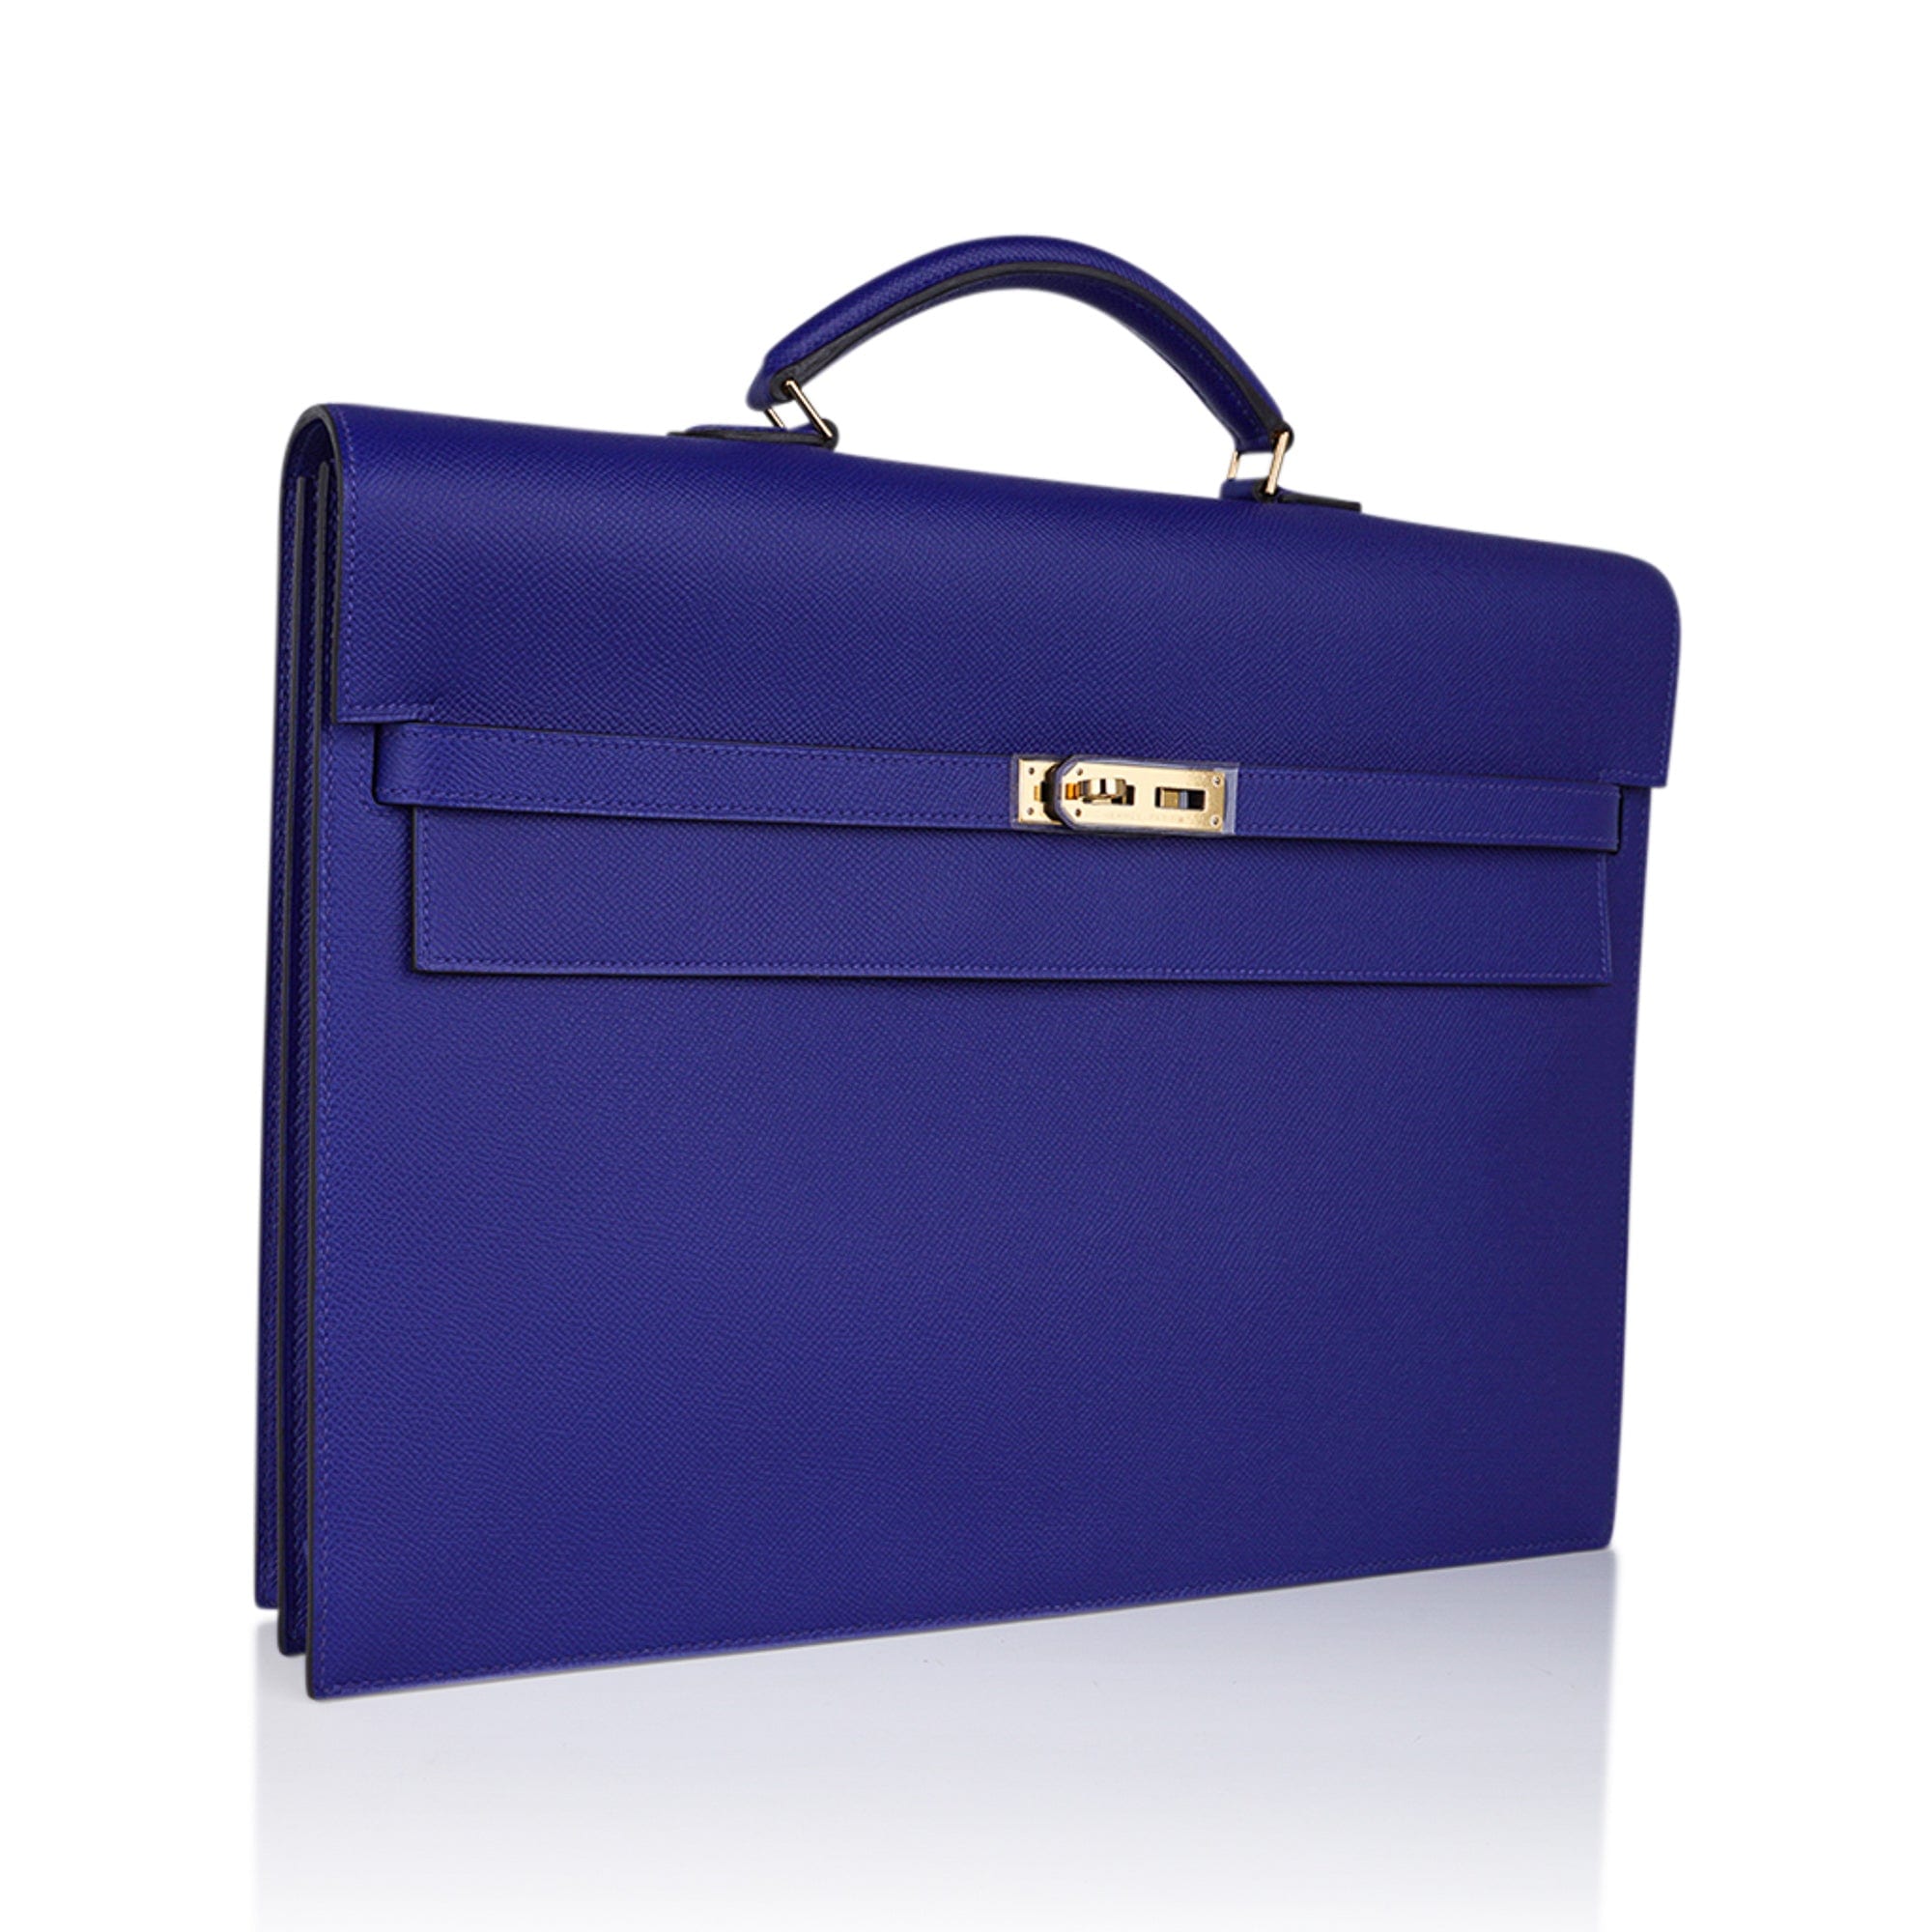 Hermès Kelly Depeche 38 Briefcase - Blue Briefcases, Bags - HER44517